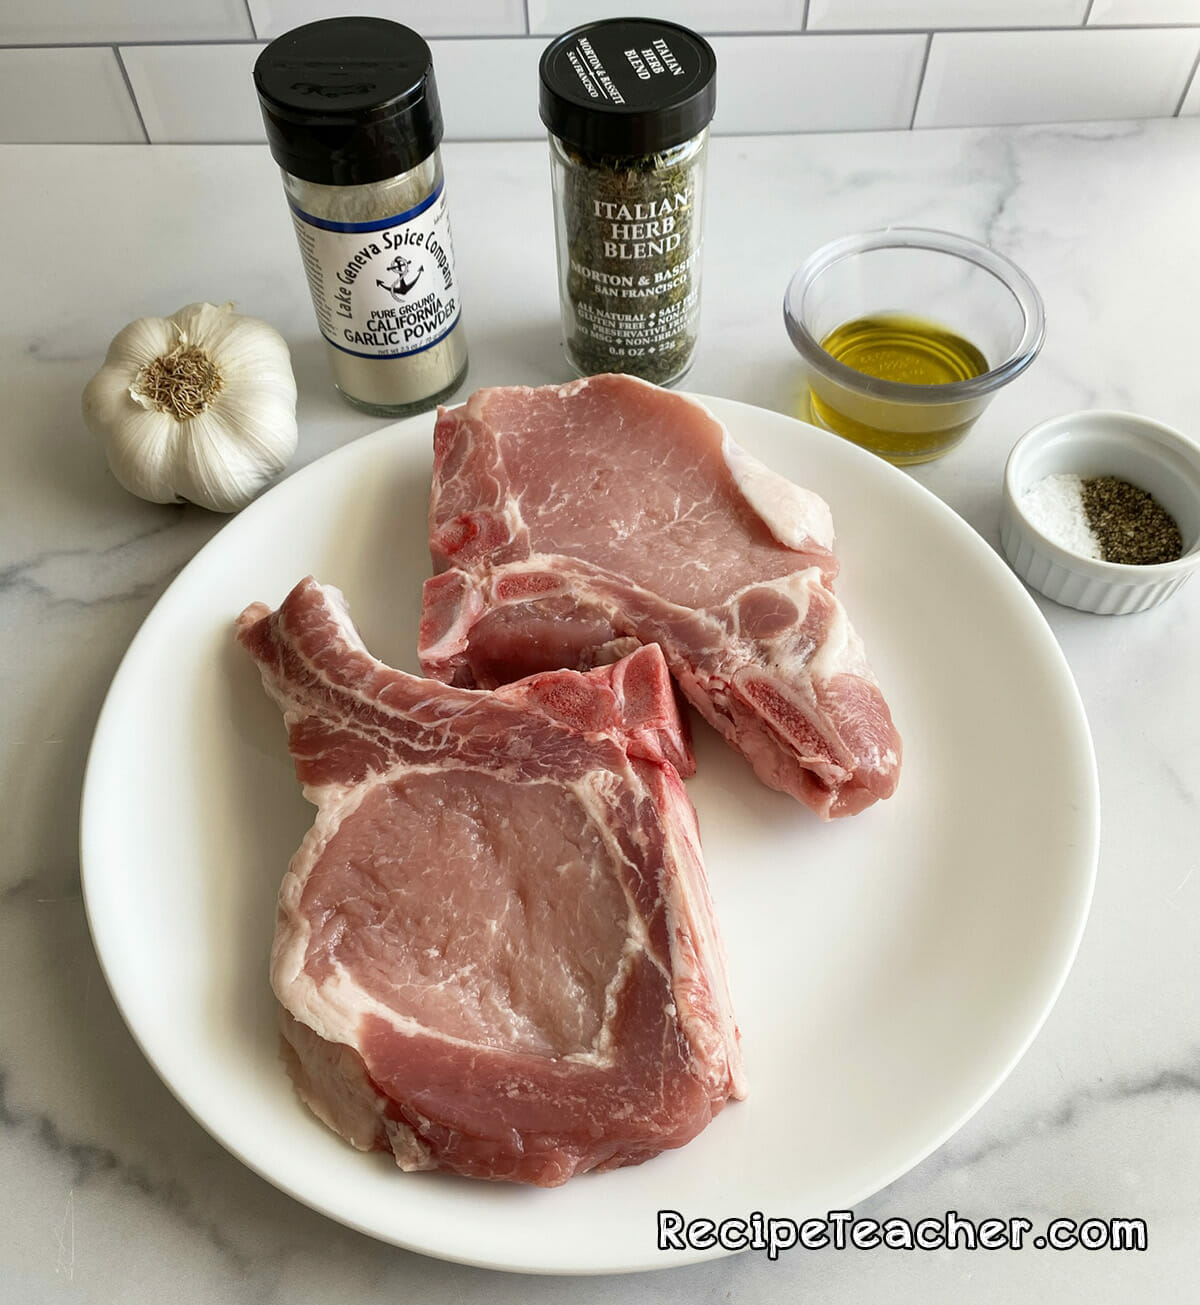 Ingredients for air fryer thick and juicy air fryer pork chops